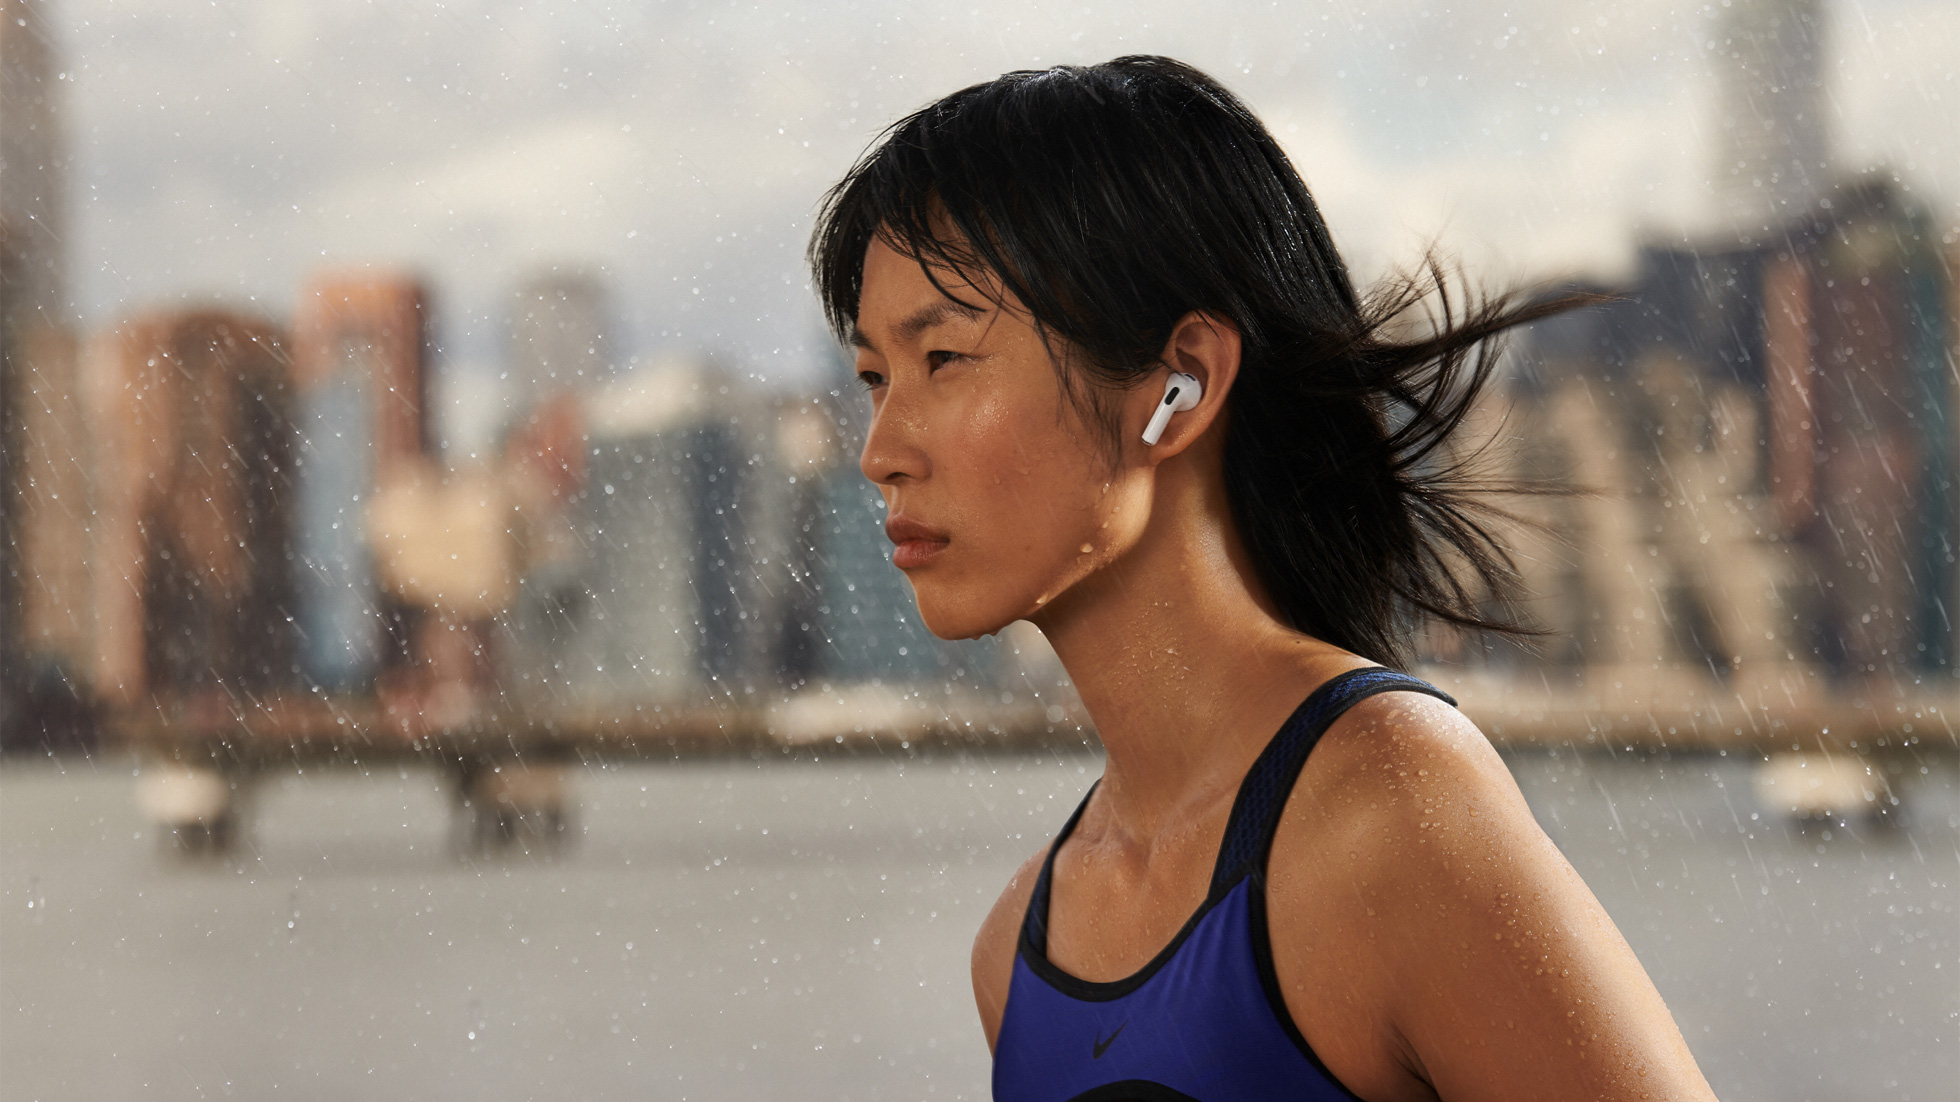 Apple reveals the next generation of AirPods